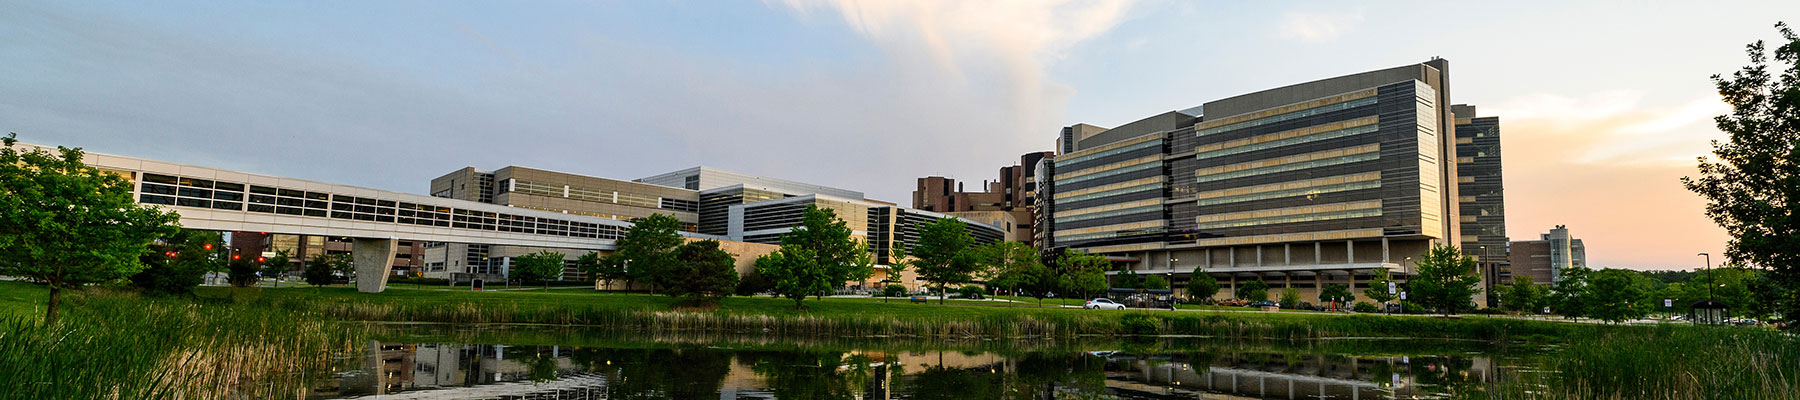 Health Sciences Learning Center at University of Wisconsin Madison